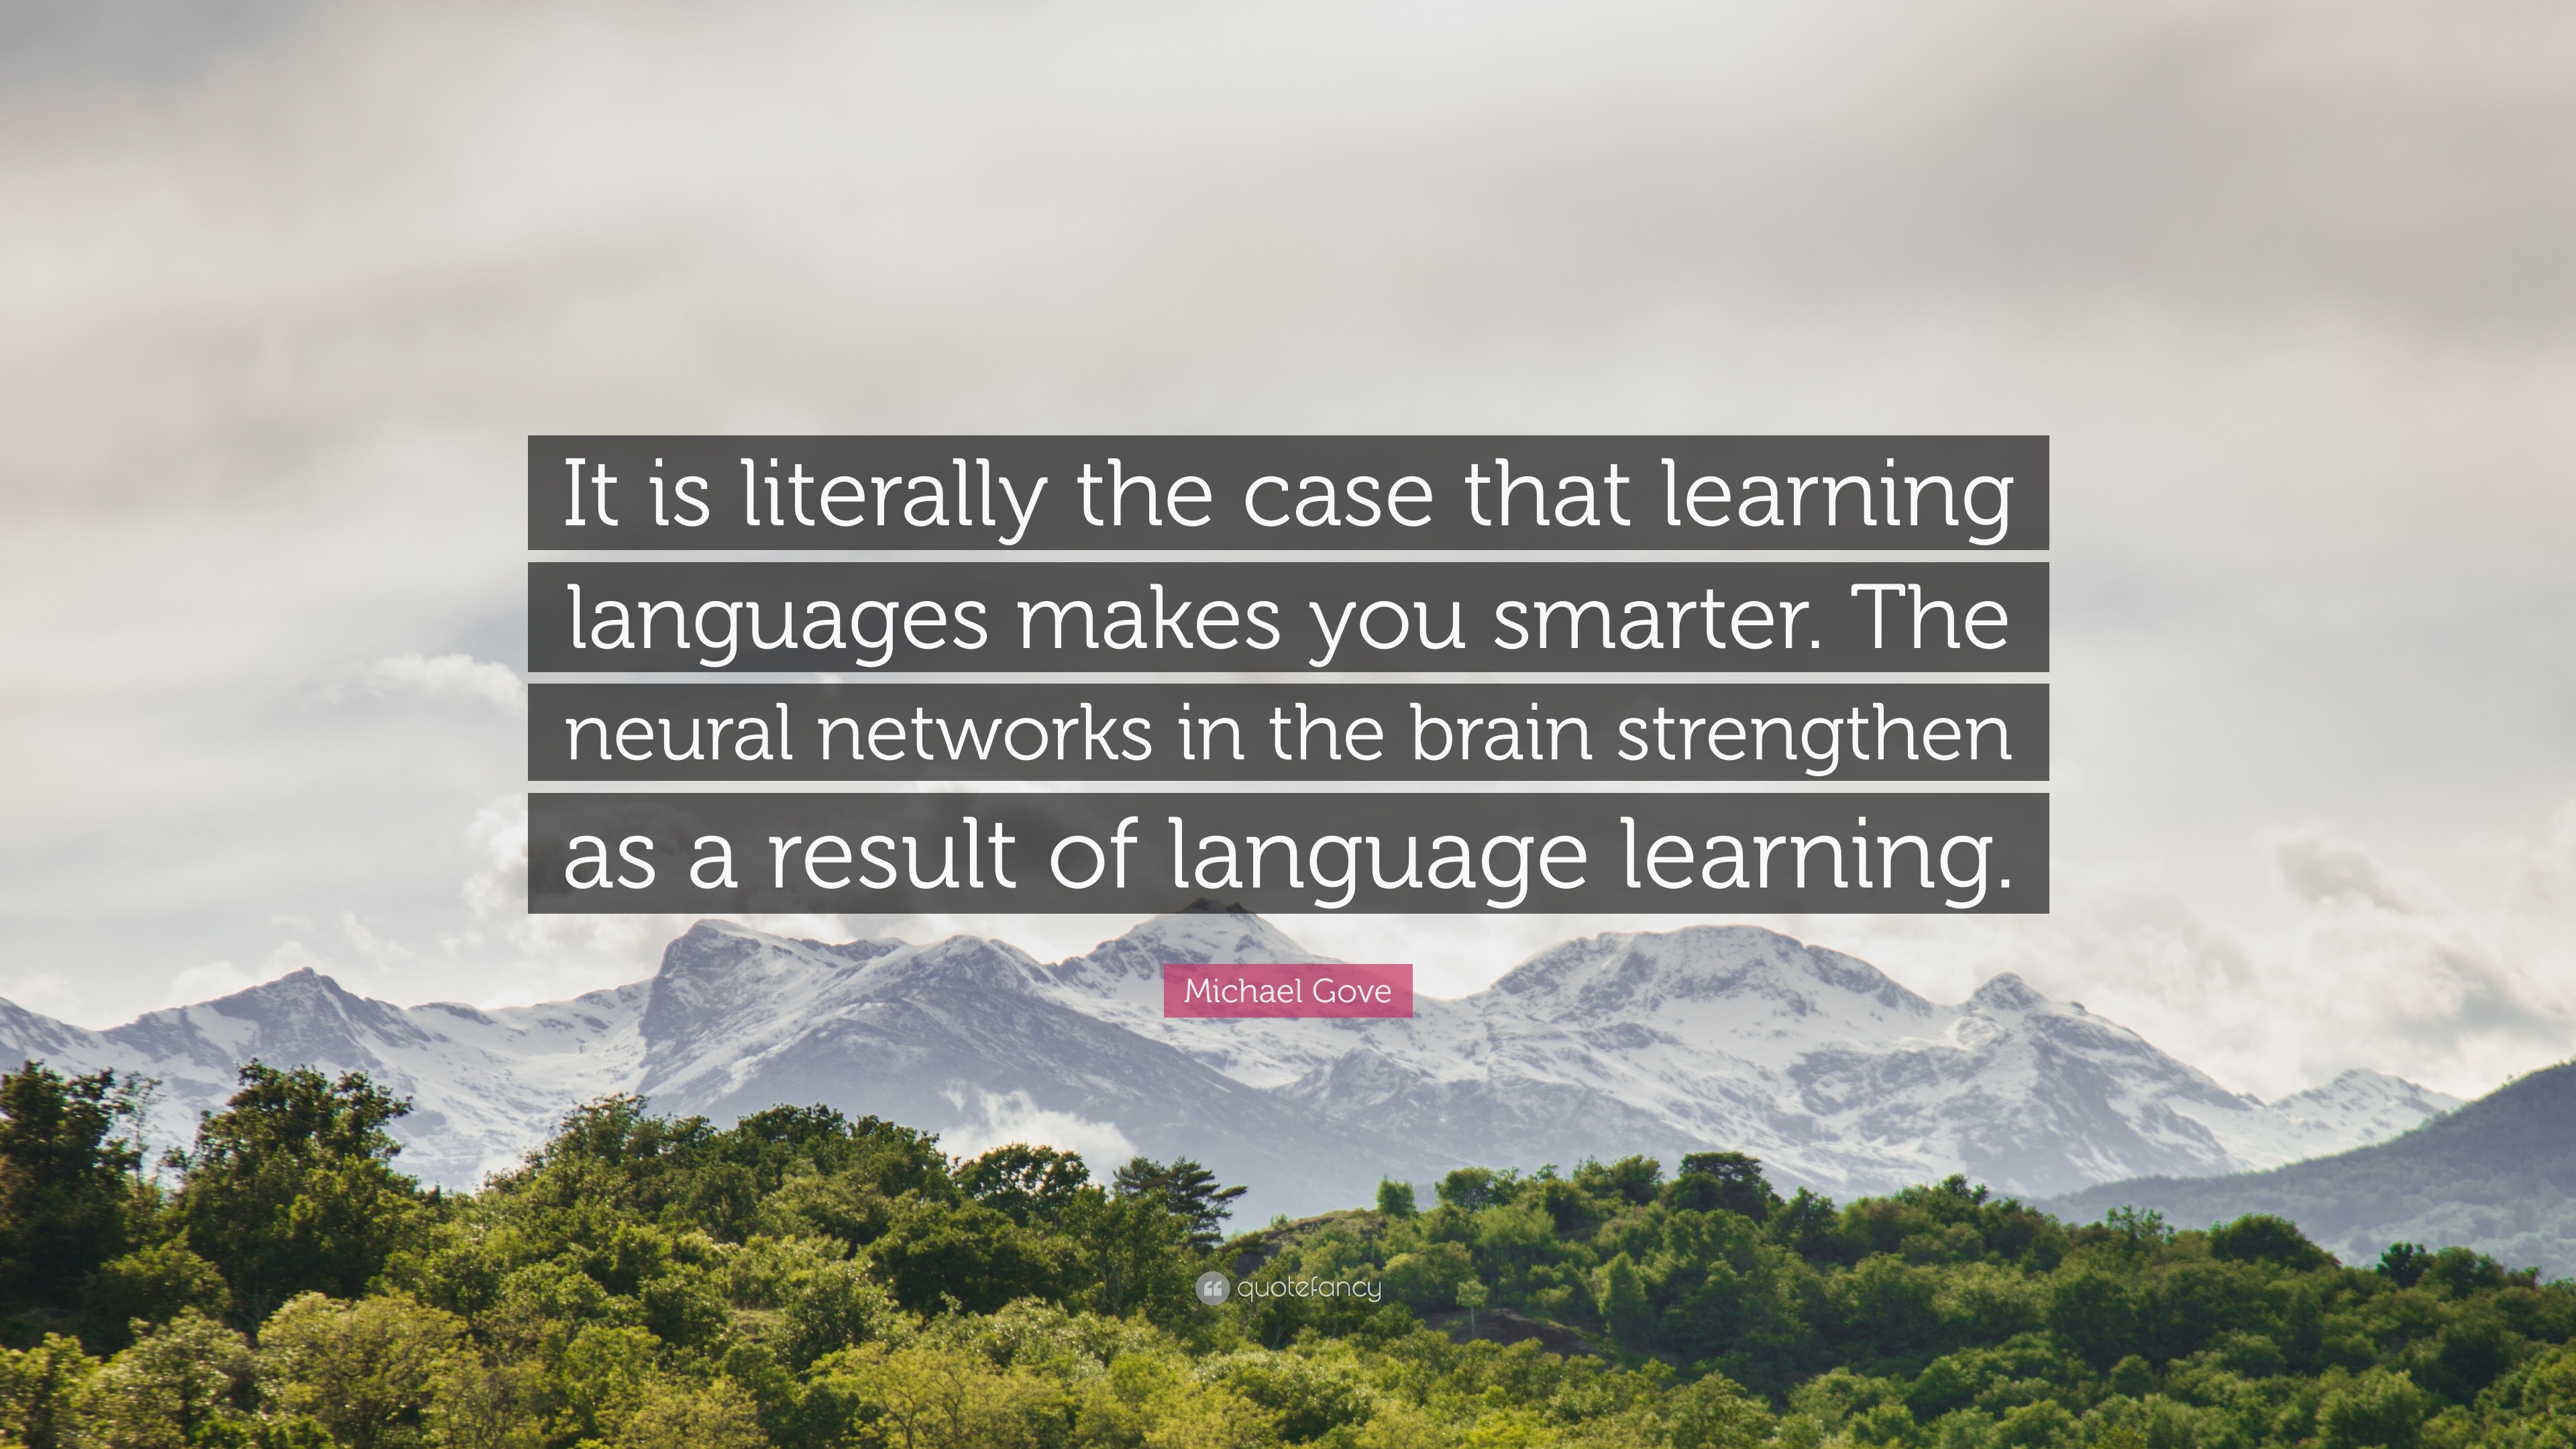 Michael Gove Quote: “It is literally the case that learning languages makes  you smarter. The neural networks in the brain strengthen as a res...”